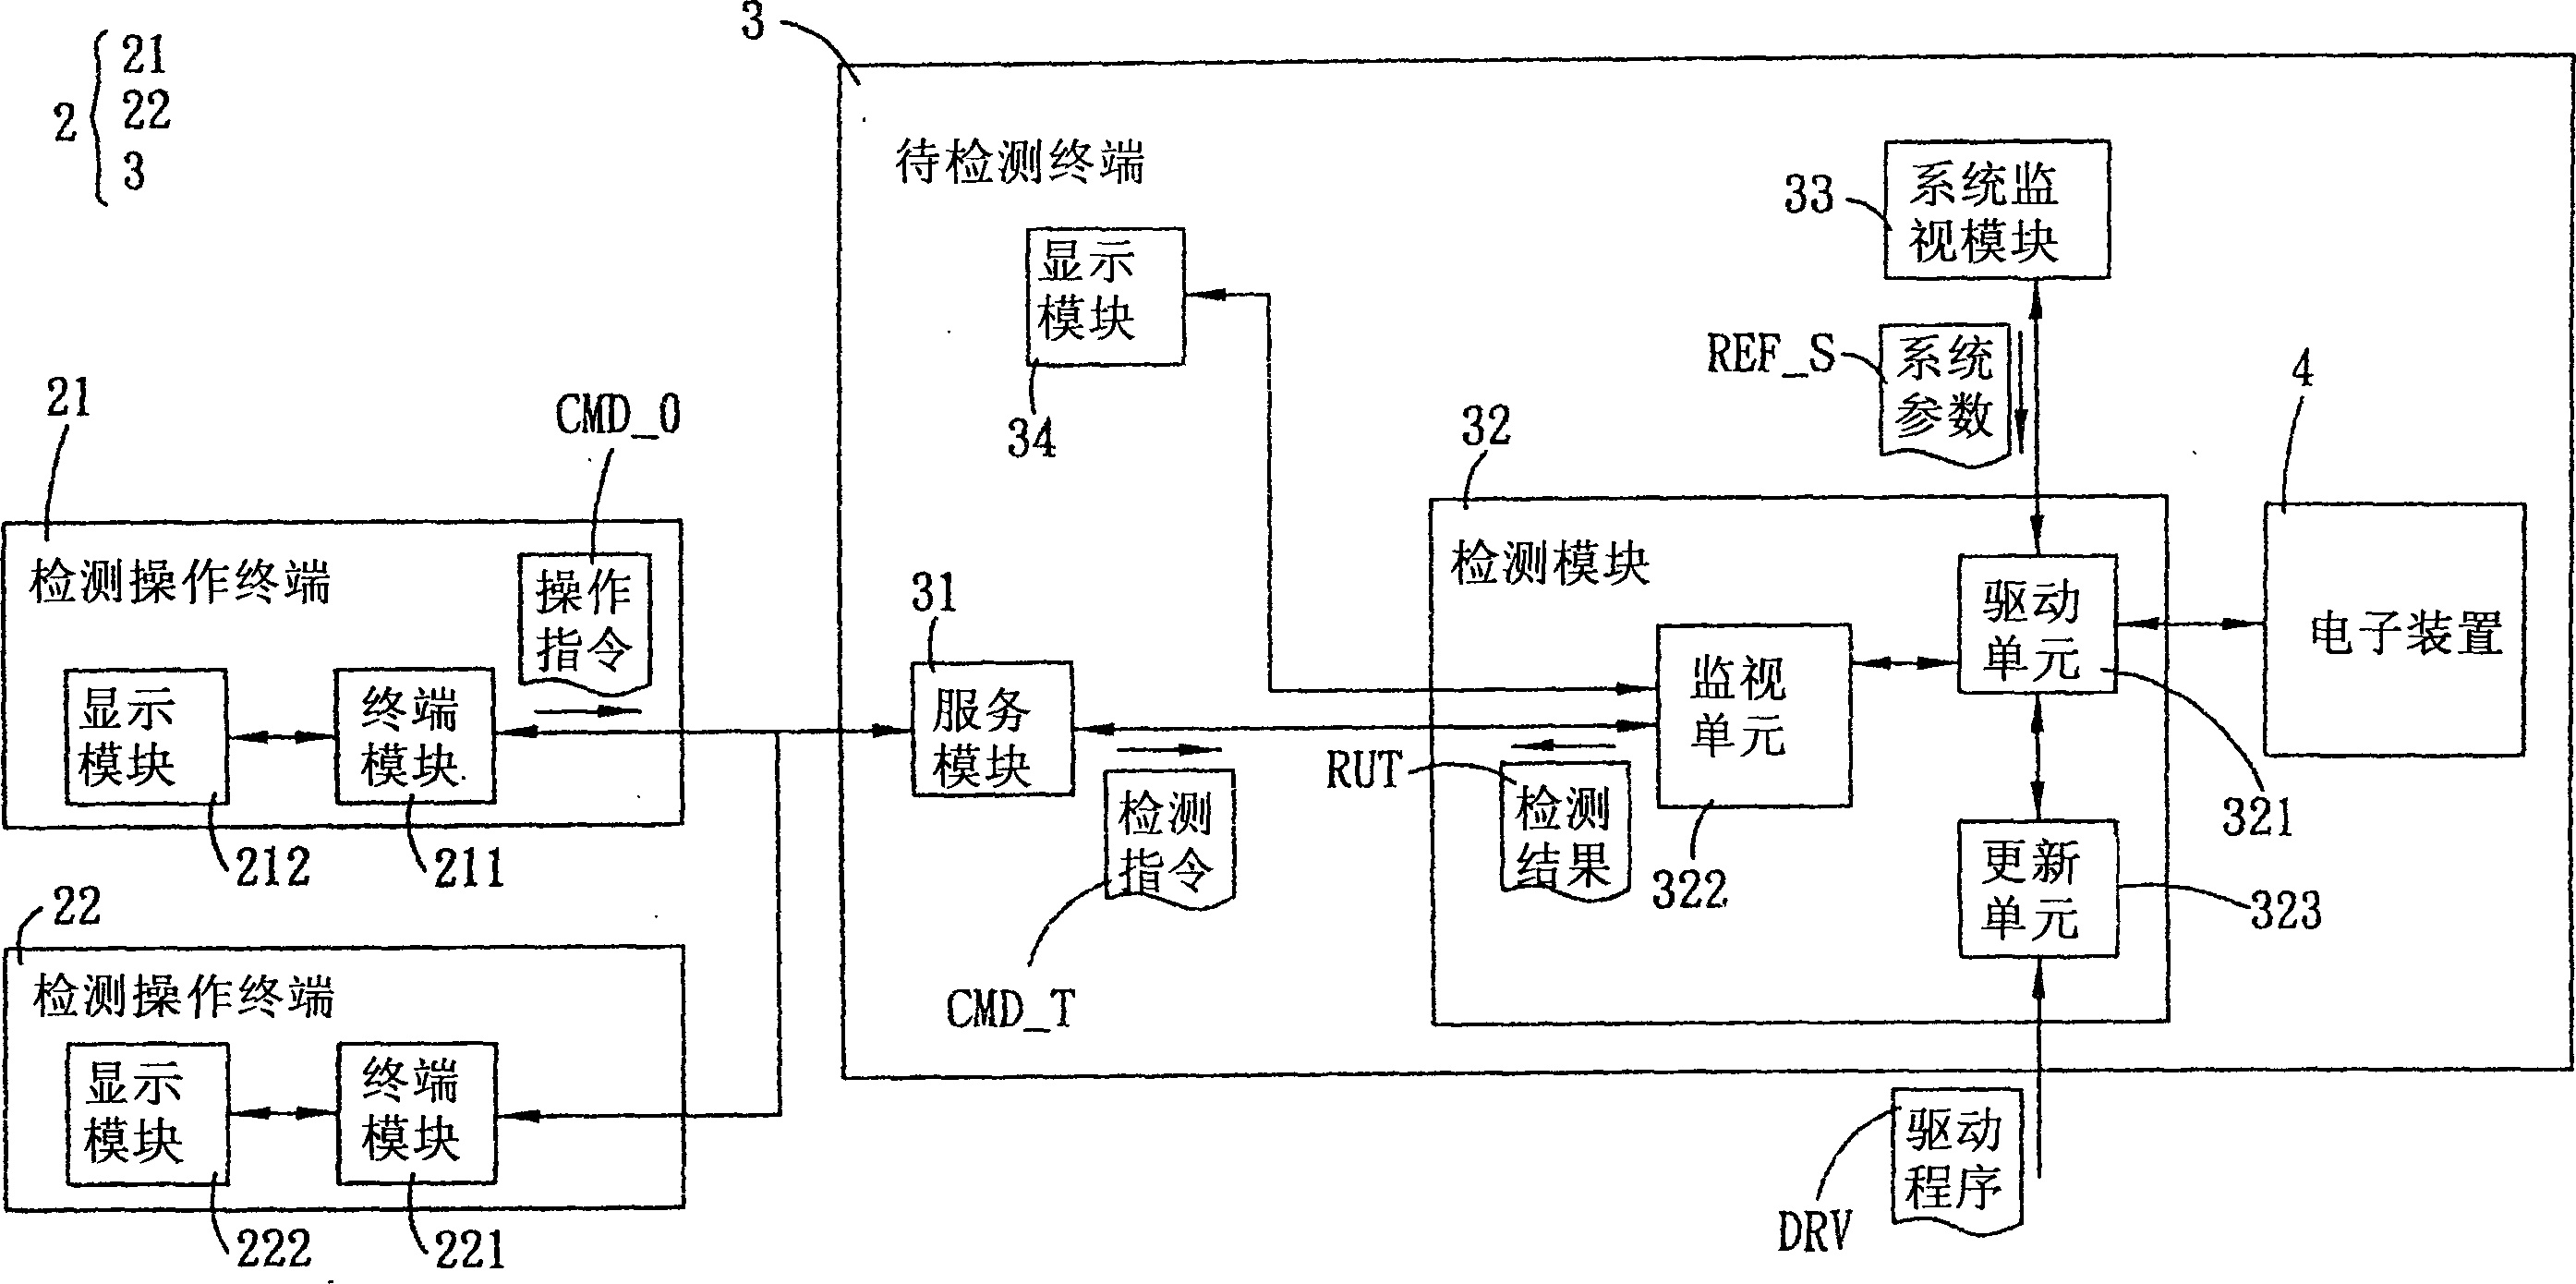 Remote detection system and method